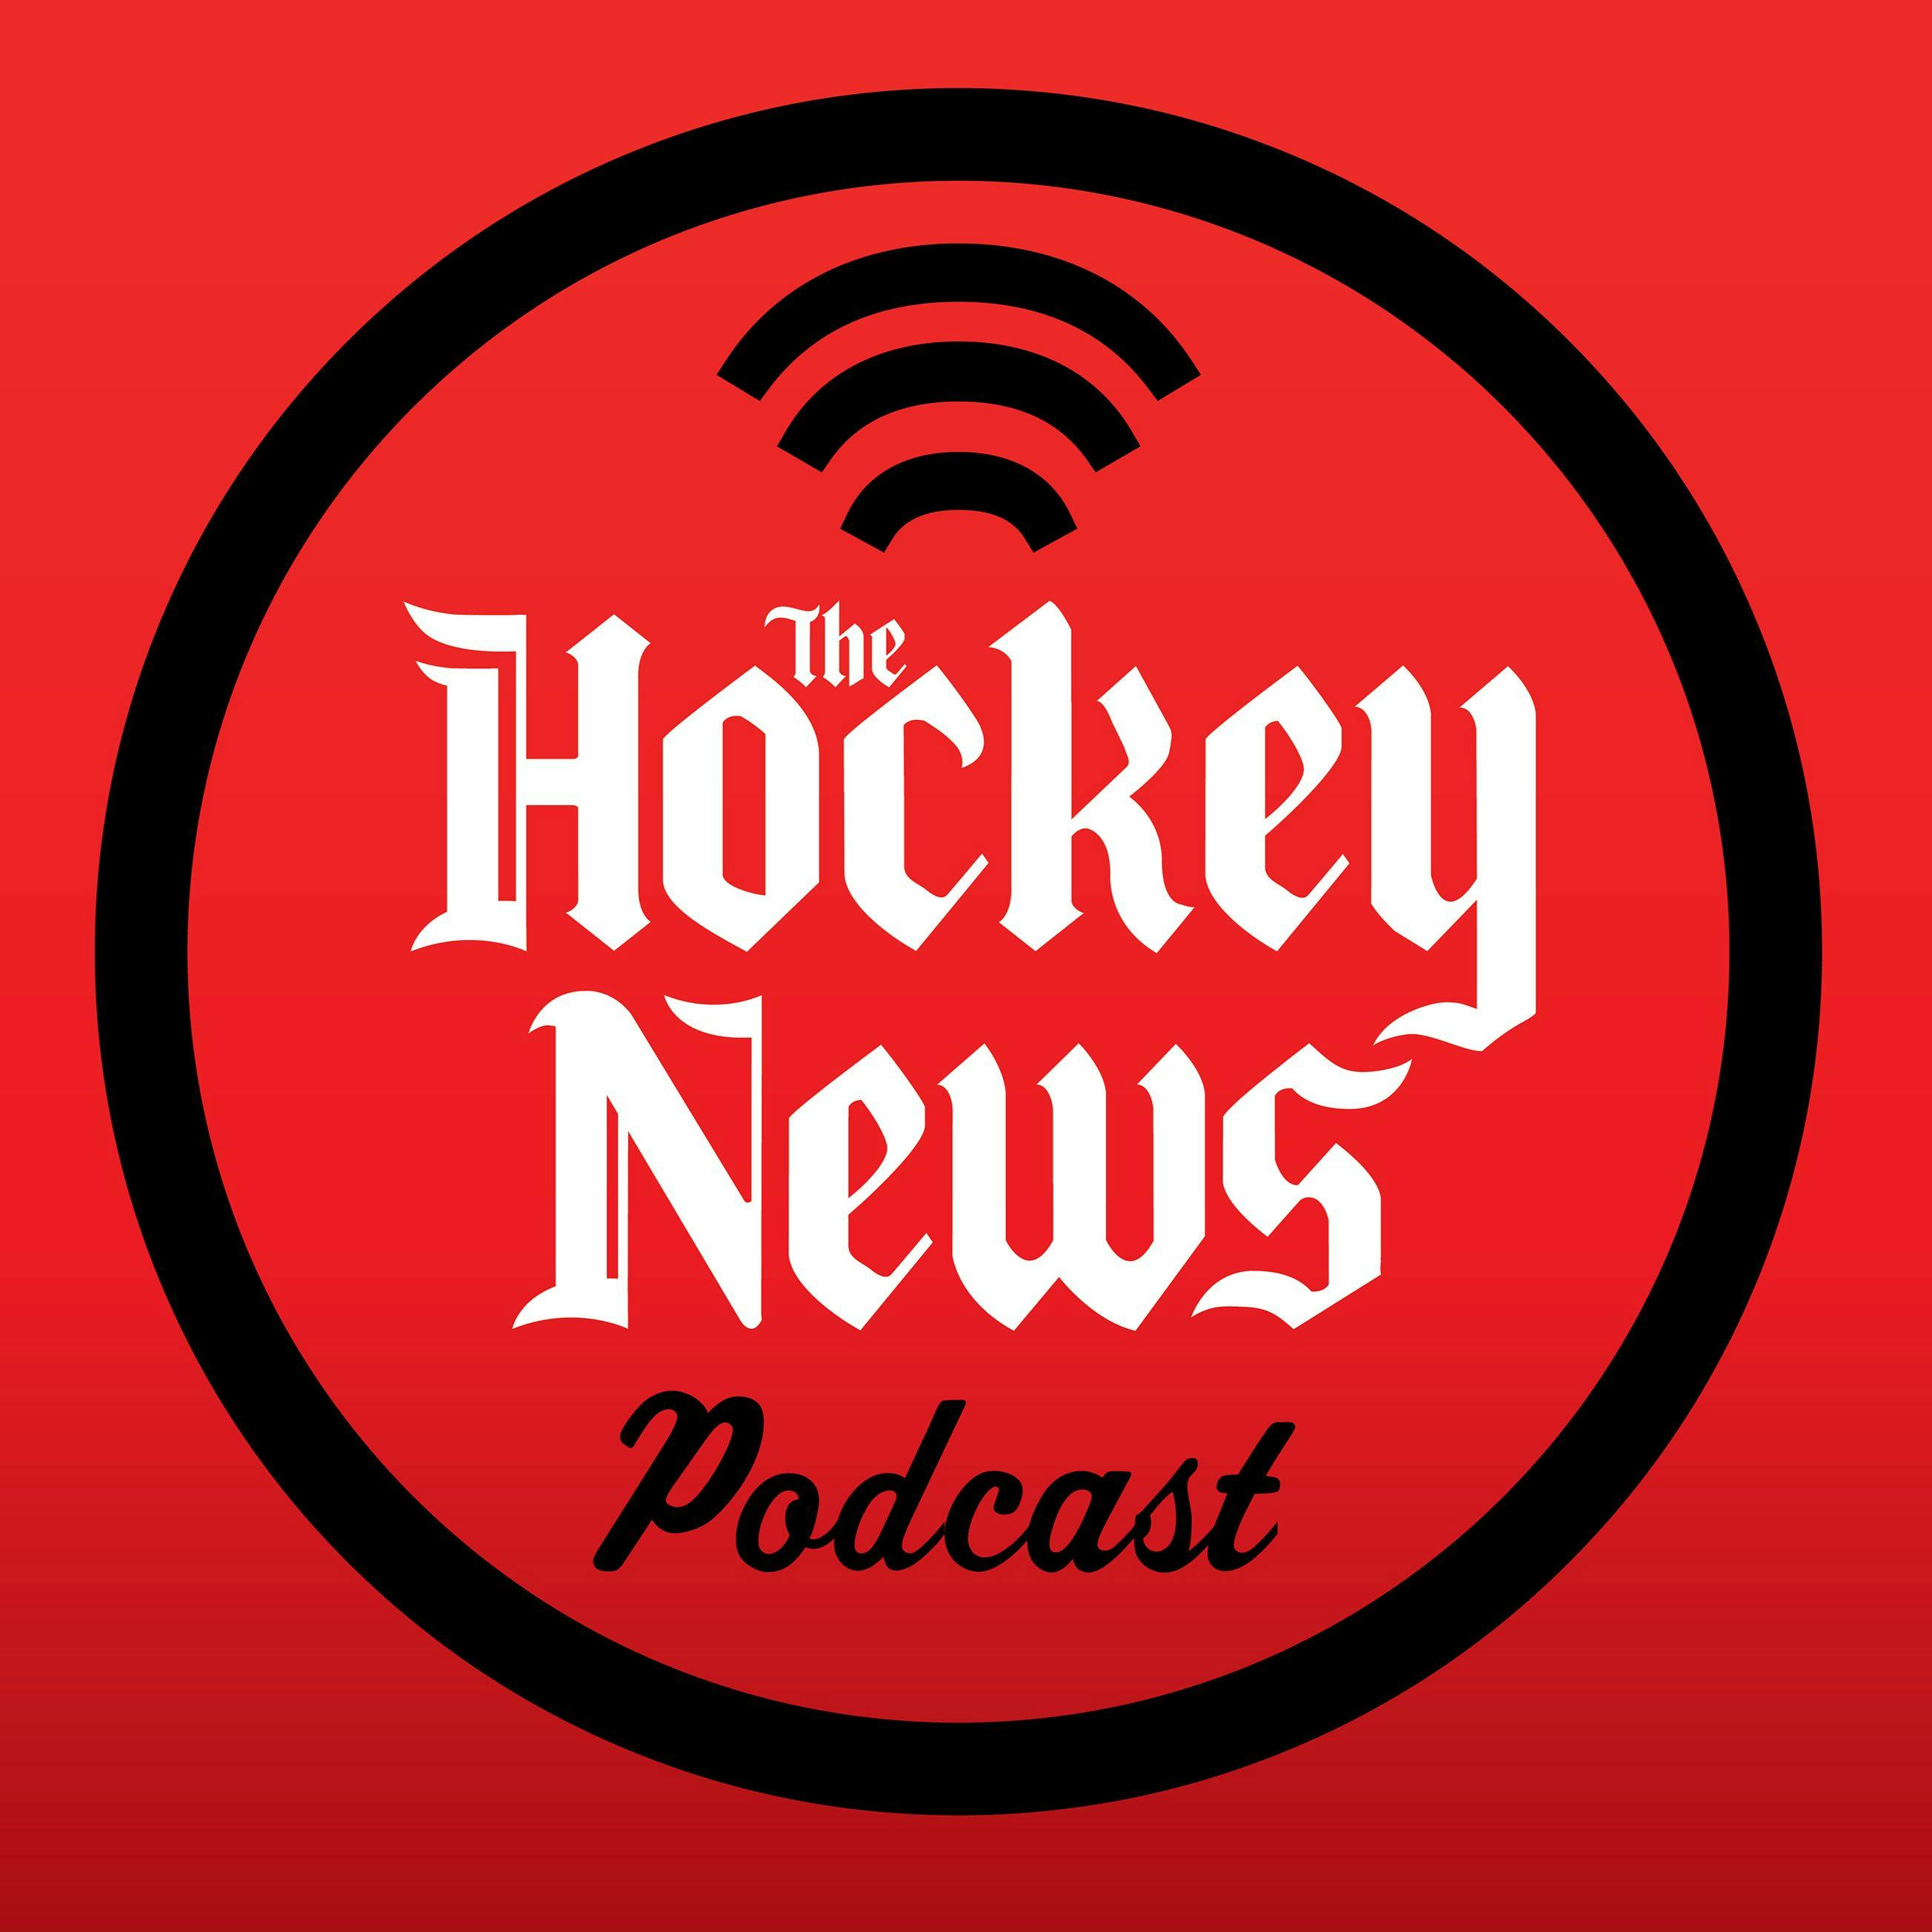 The Hockey News Podcast: Analyzing World Junior Camp Rosters